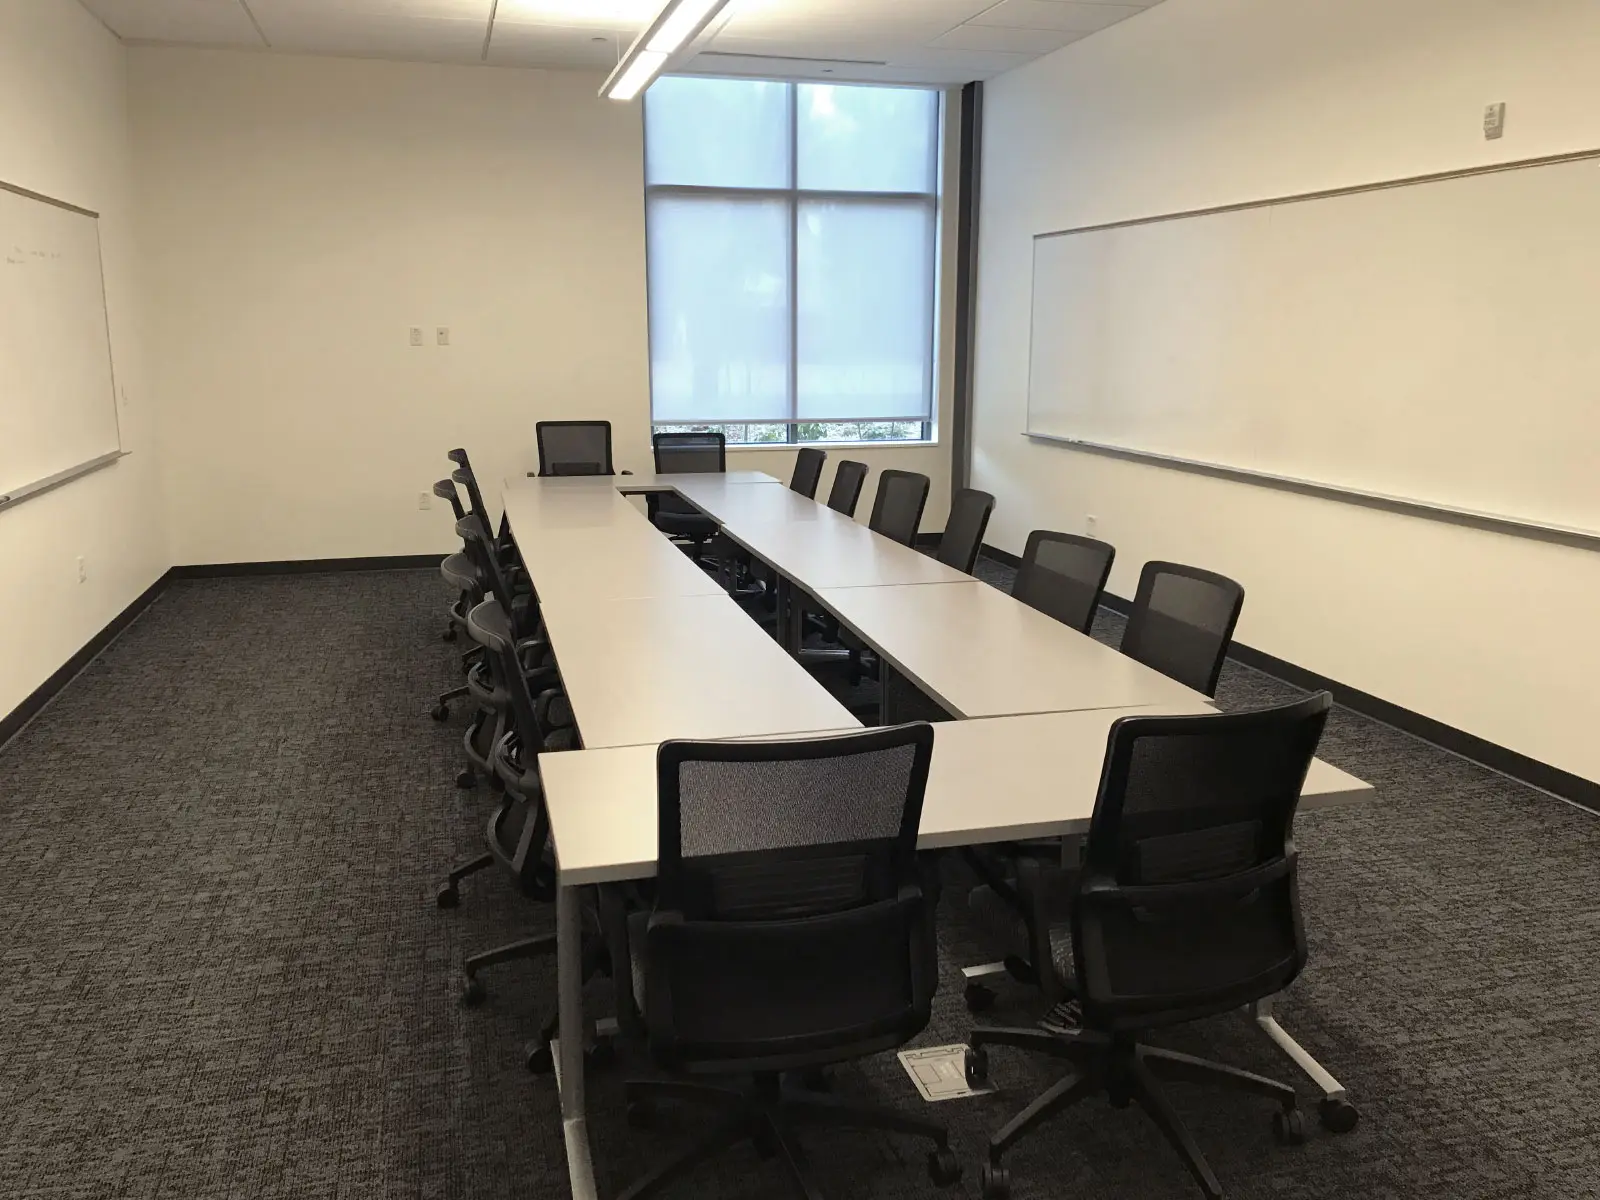 Two rows of chairs and tables in a large Harmony campus conference room